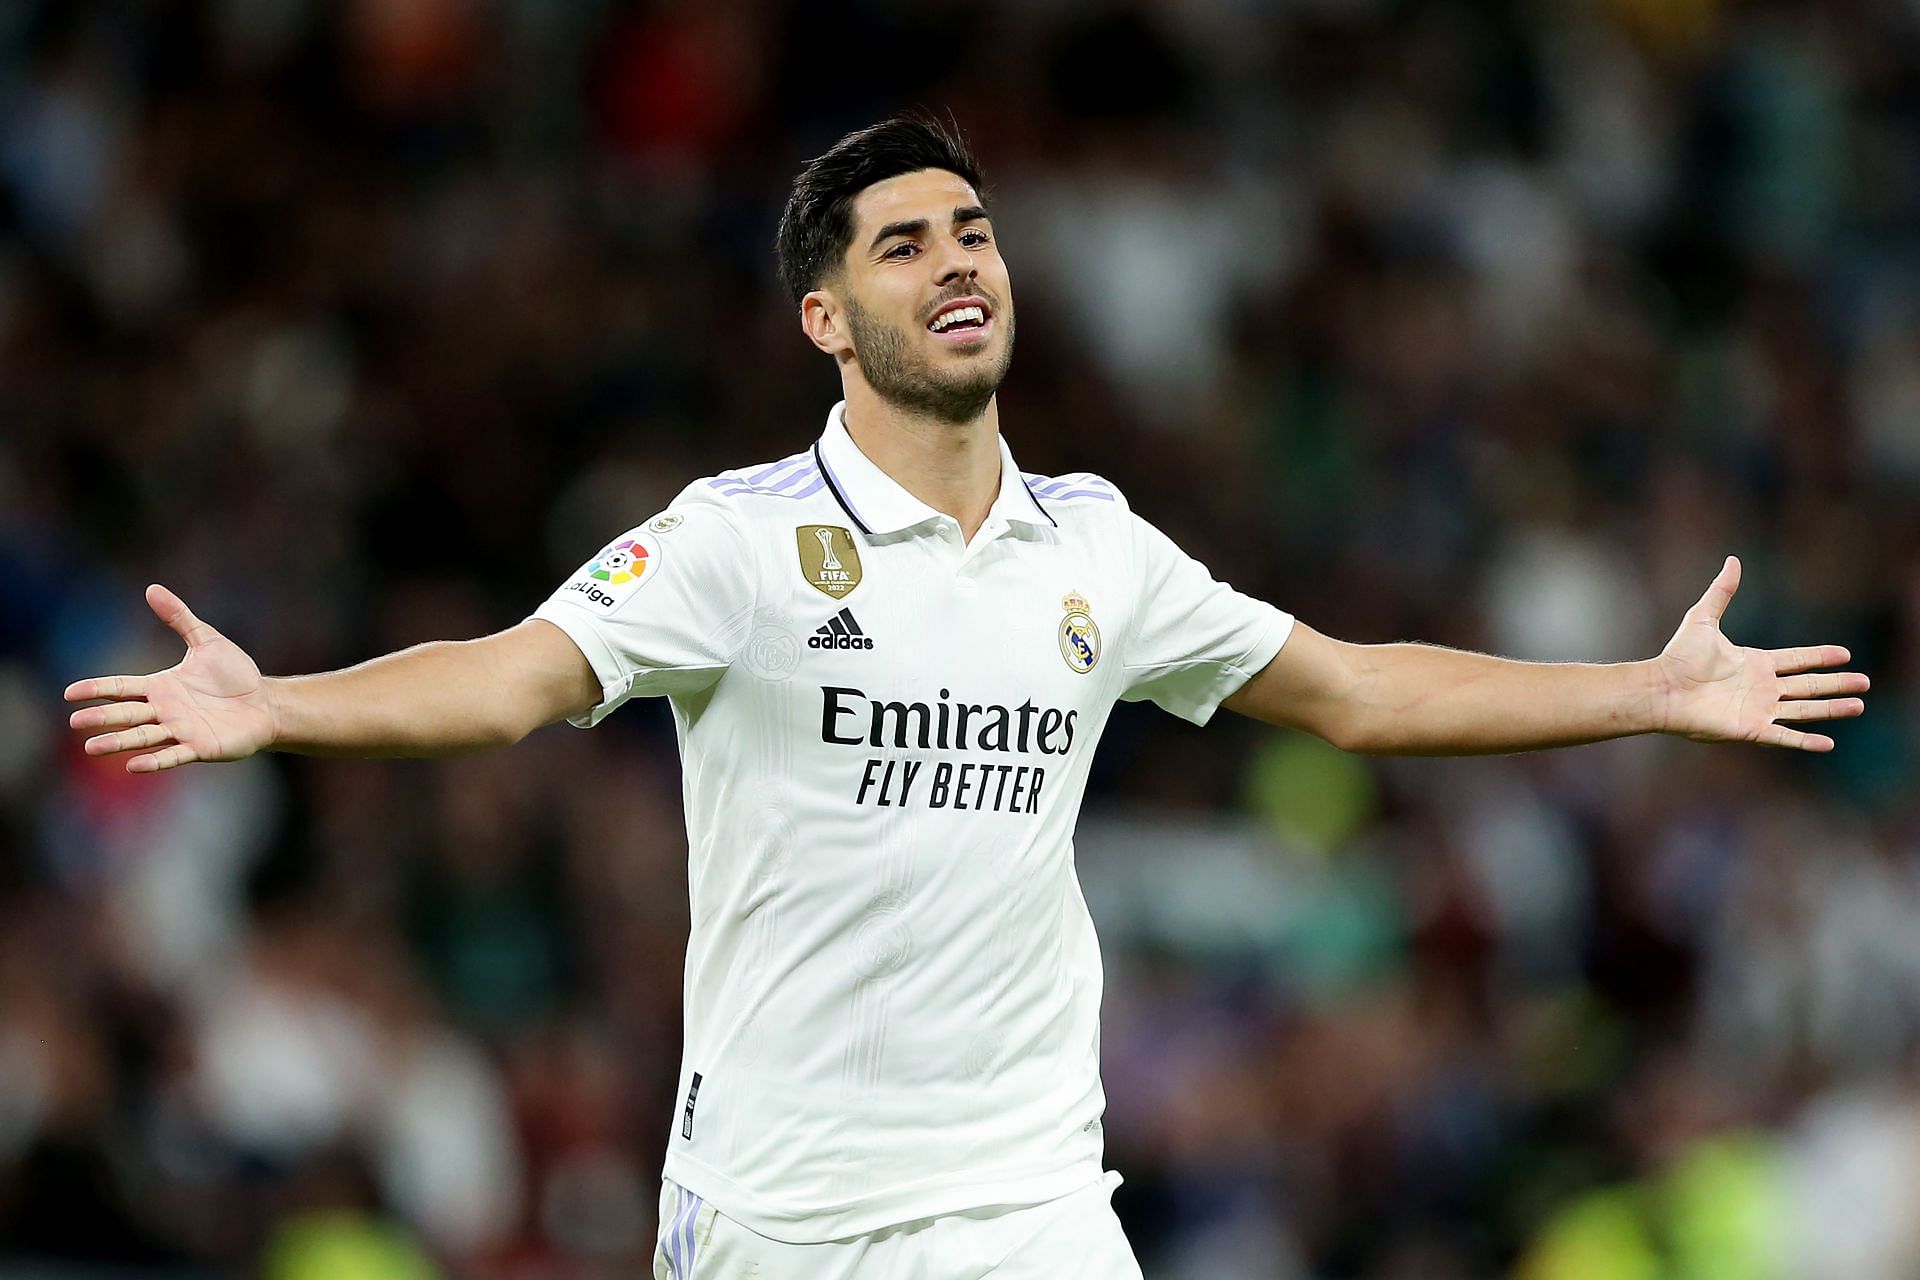 Asensio left Real Madrid as a three-time UCL and La Liga title winner.